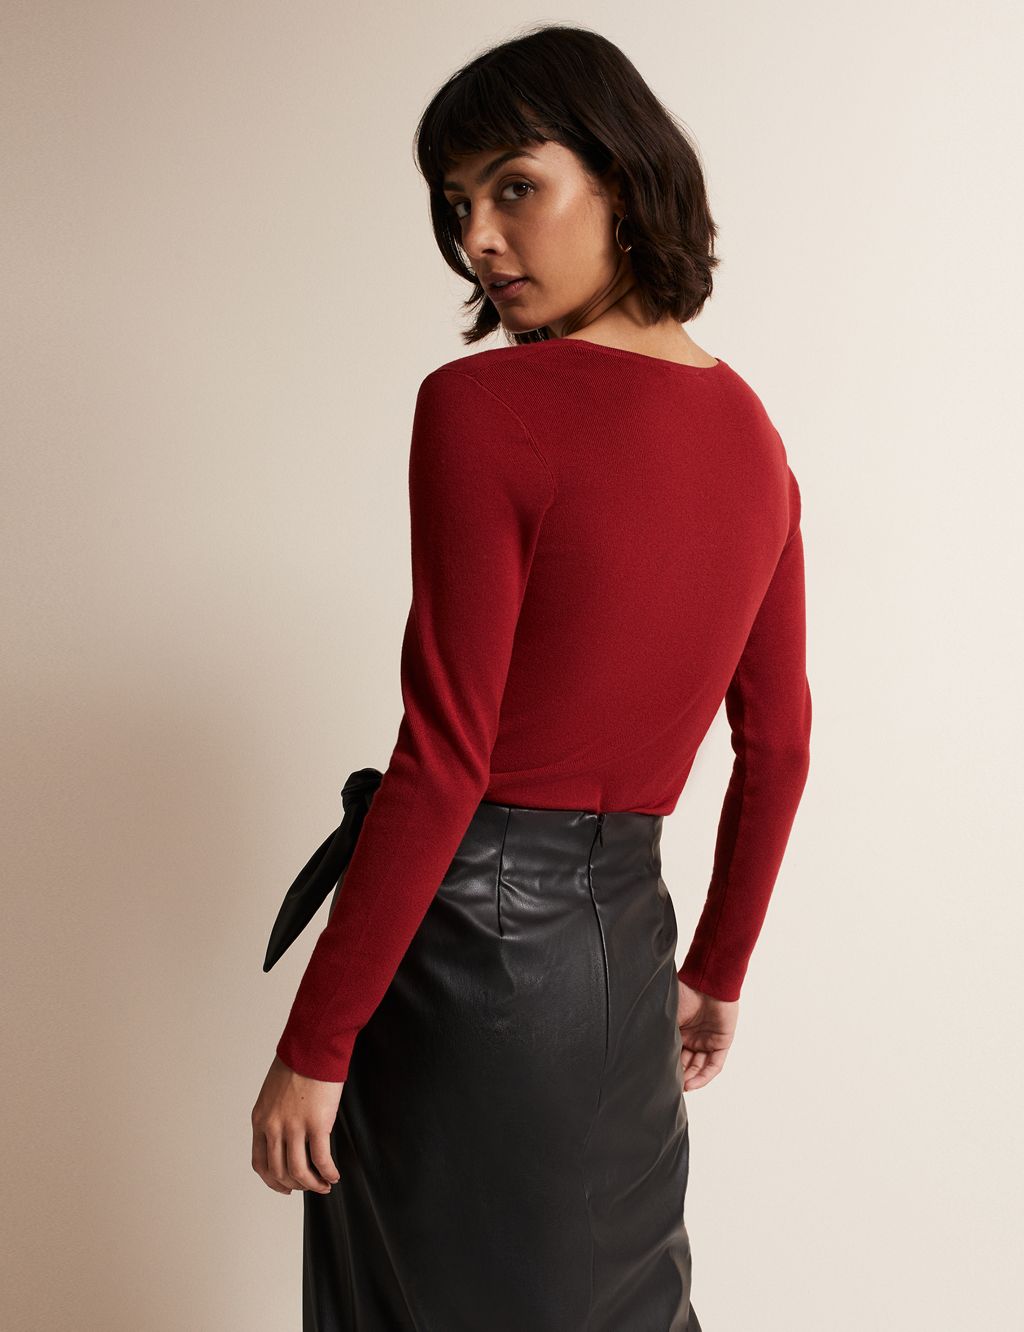 Ribbed V-Neck Knitted Top image 3